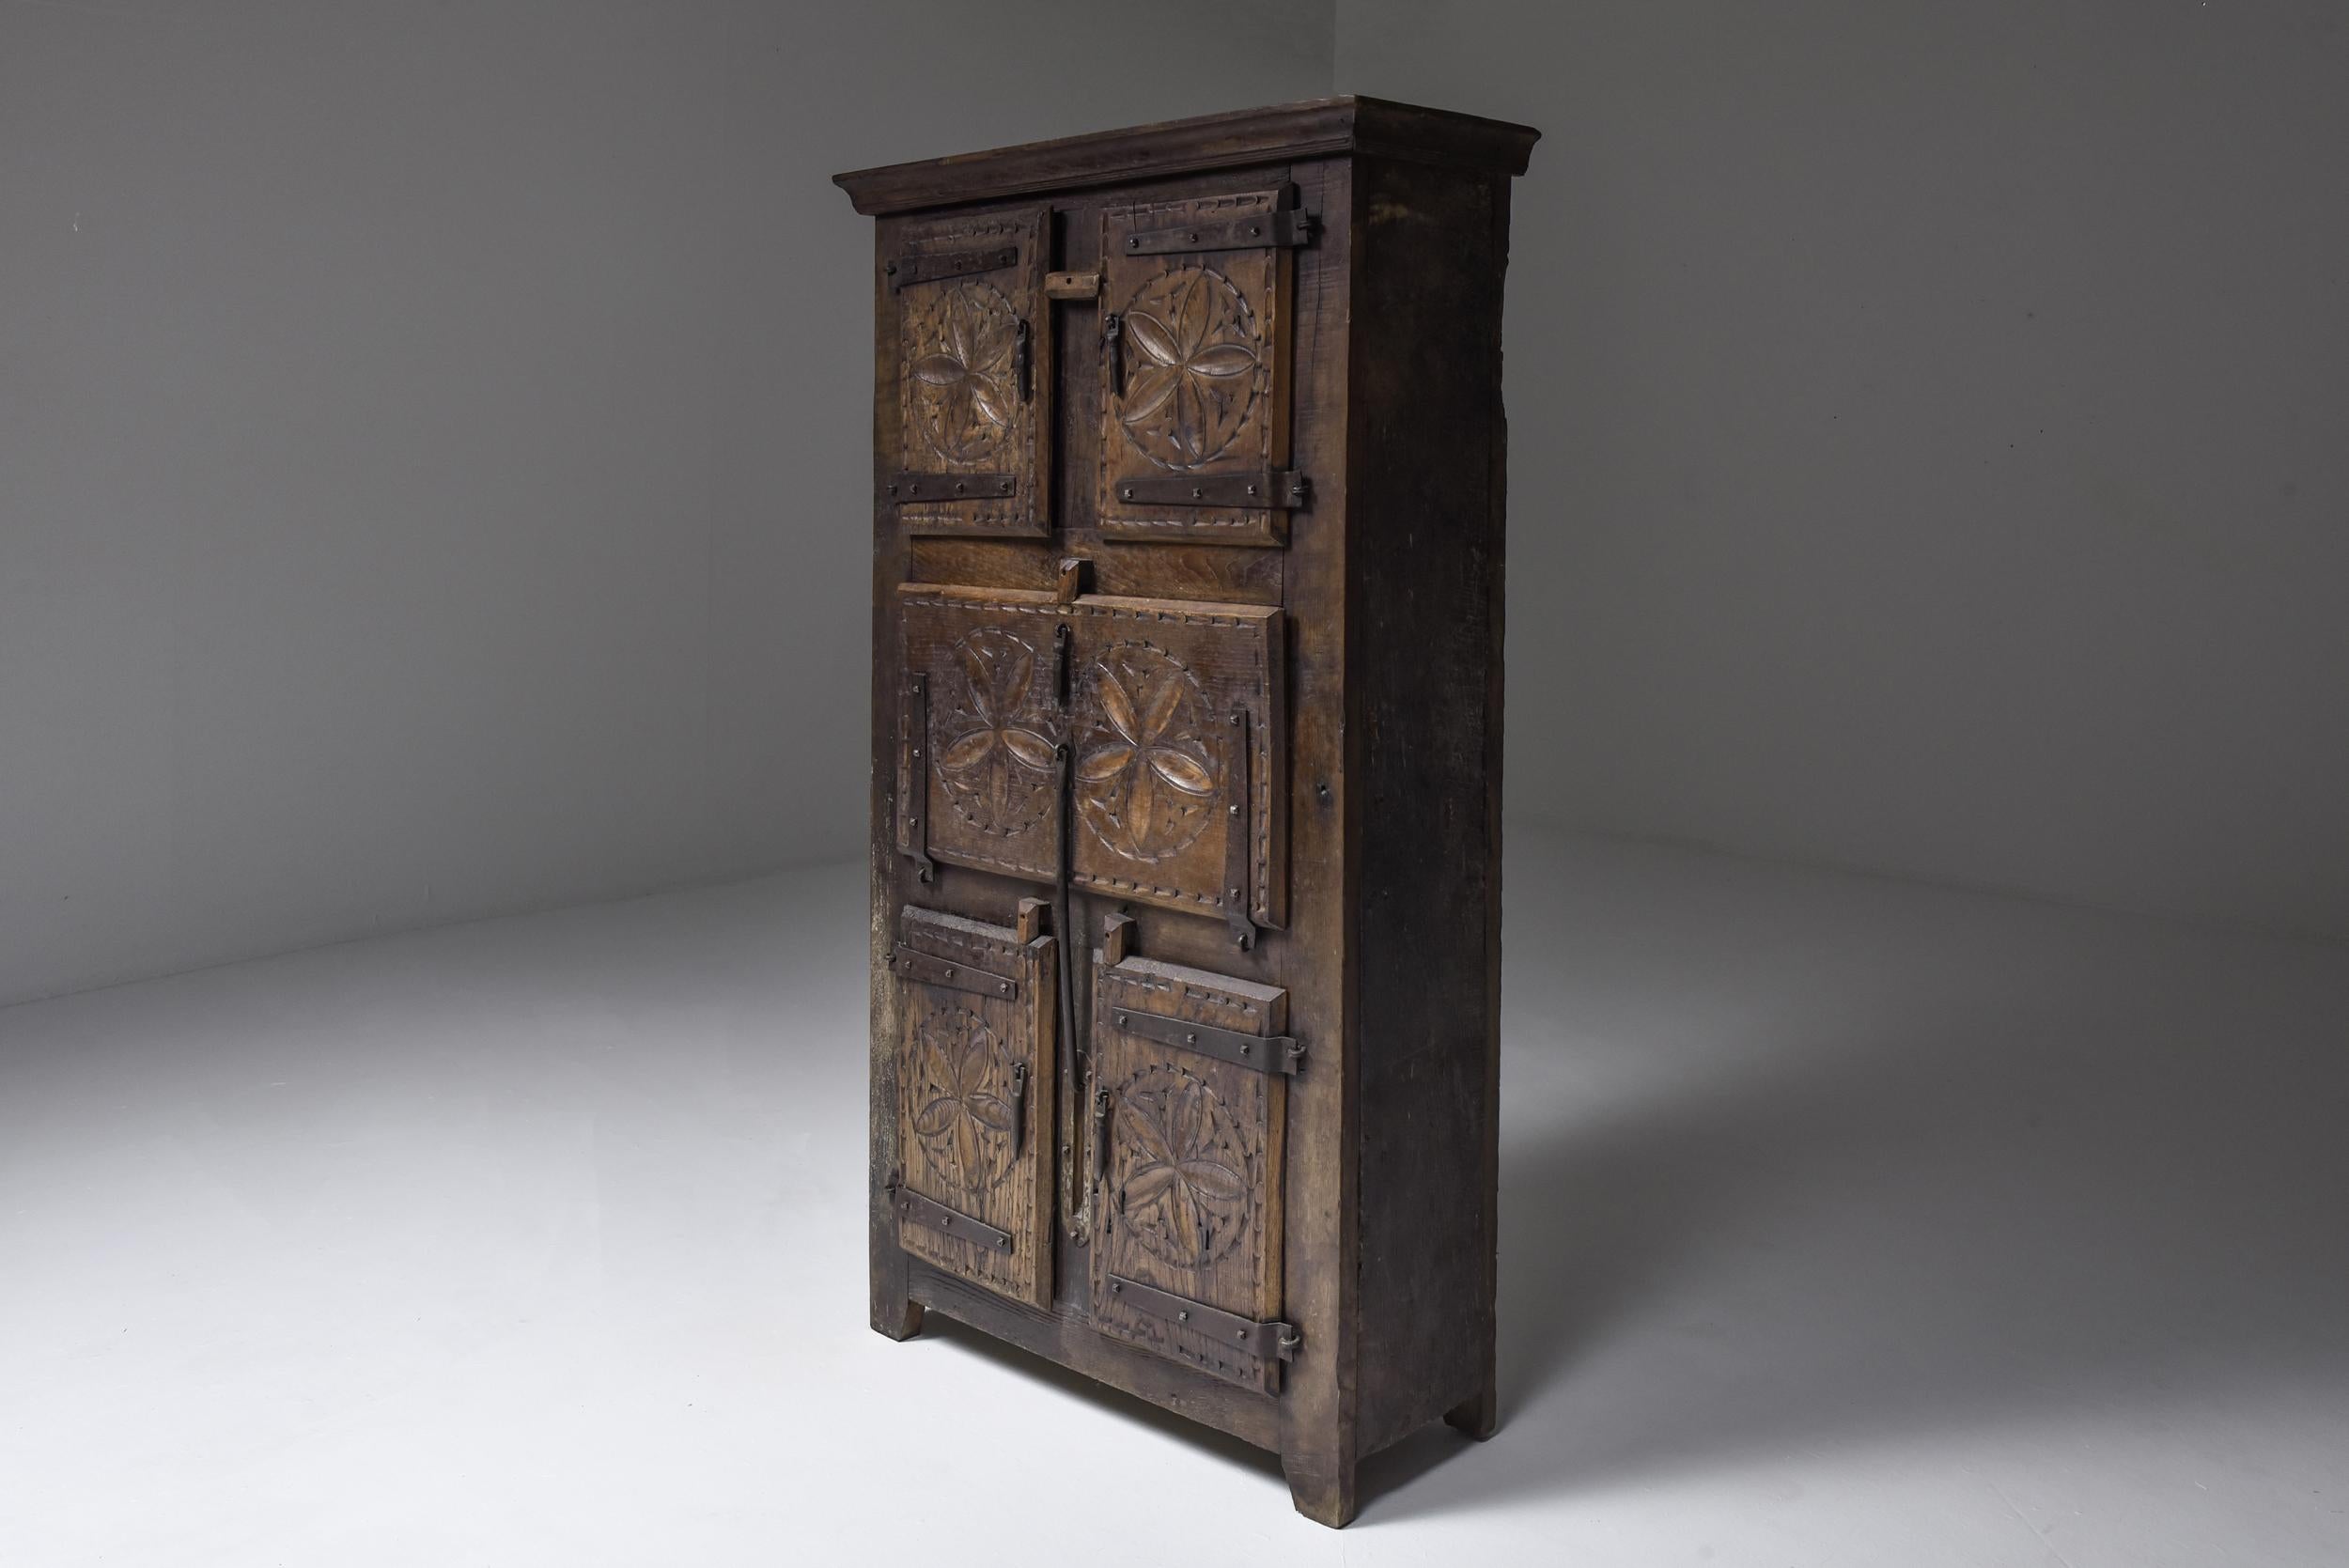 19th-century travail populaire cabinet from Bretagne, France. Reflecting the essence of French Wabi Sabi, this solid wood armoirette embodies the zen-like harmony and refined simplicity of folk art. Adorned with delicate sand dollar carvings, this